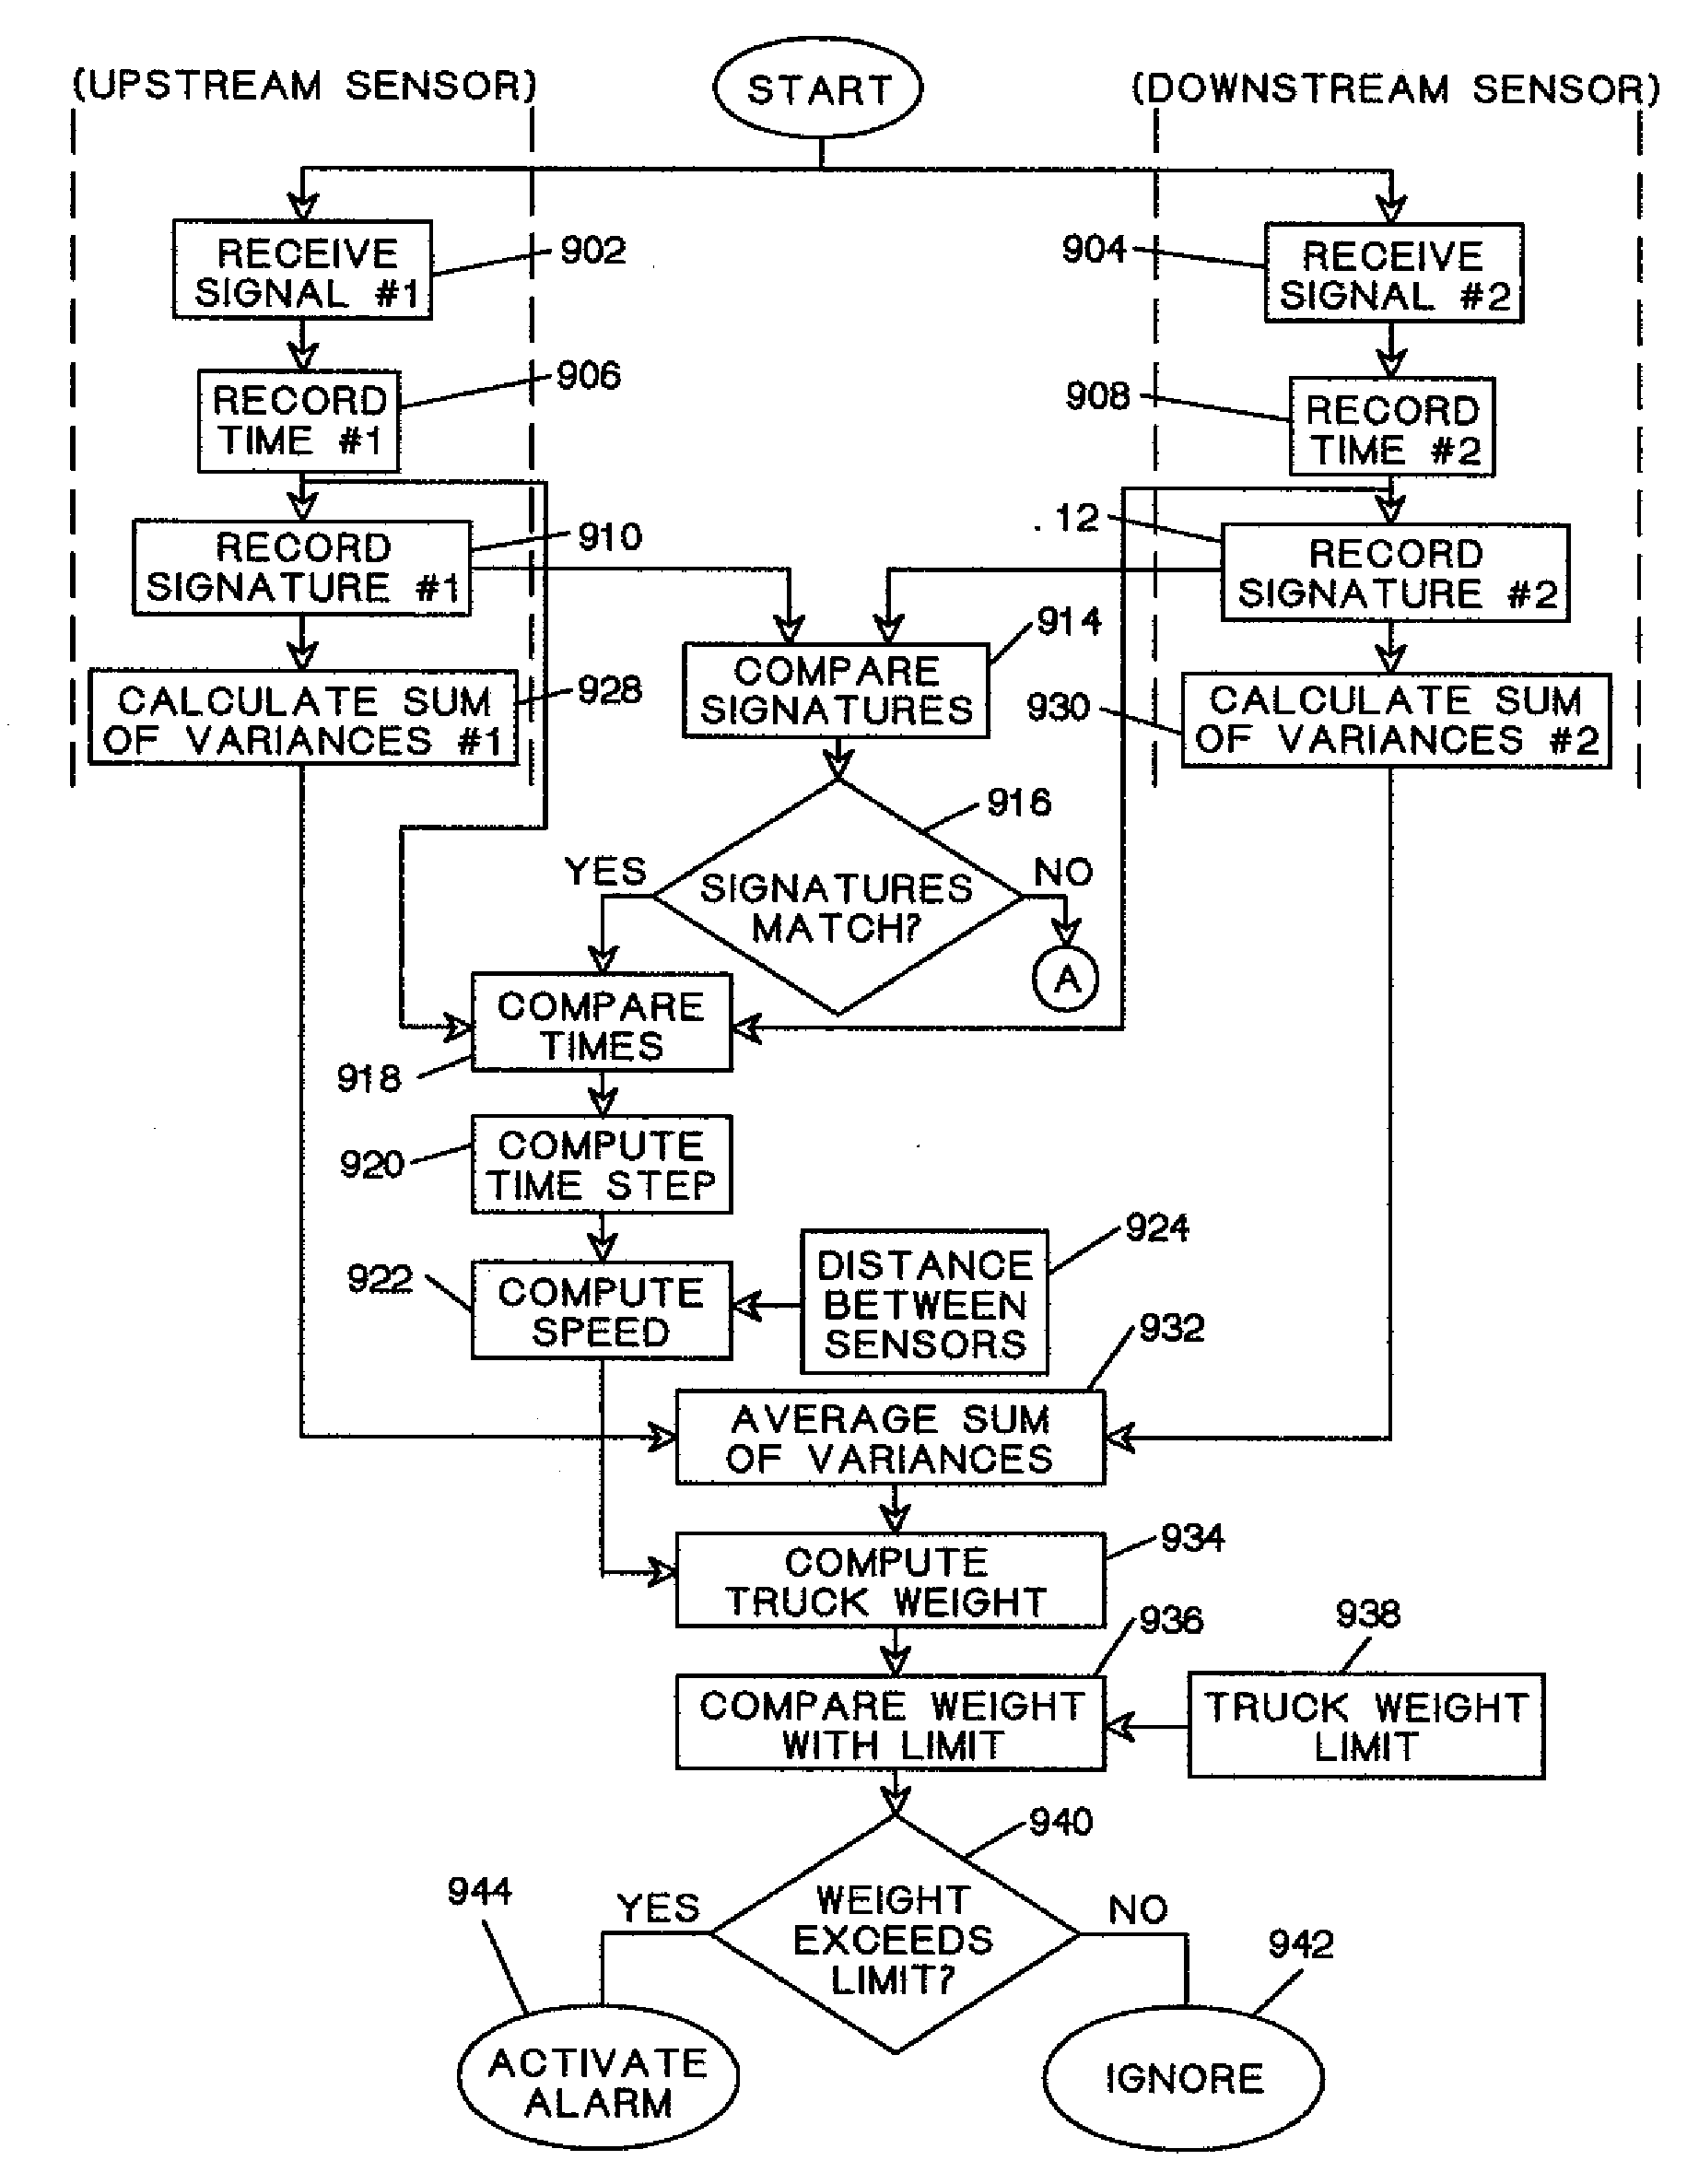 Method for weighing vehicles crossing a bridge